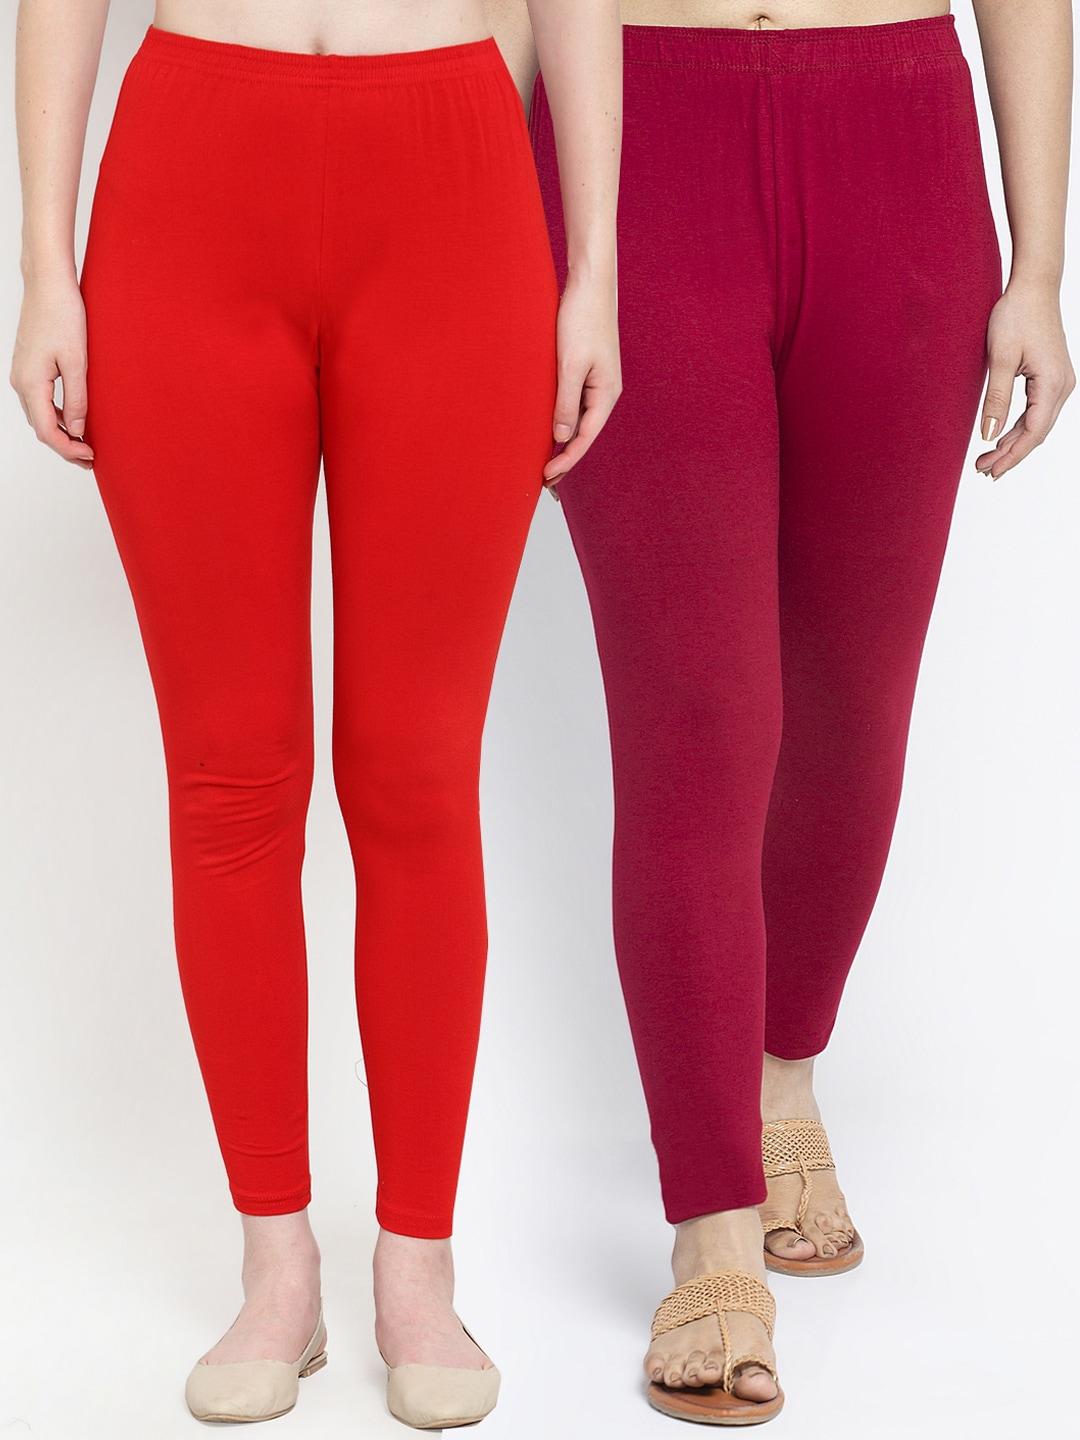 gracit-women-pack-of-2-red-&-maroon-combed-cotton-leggings